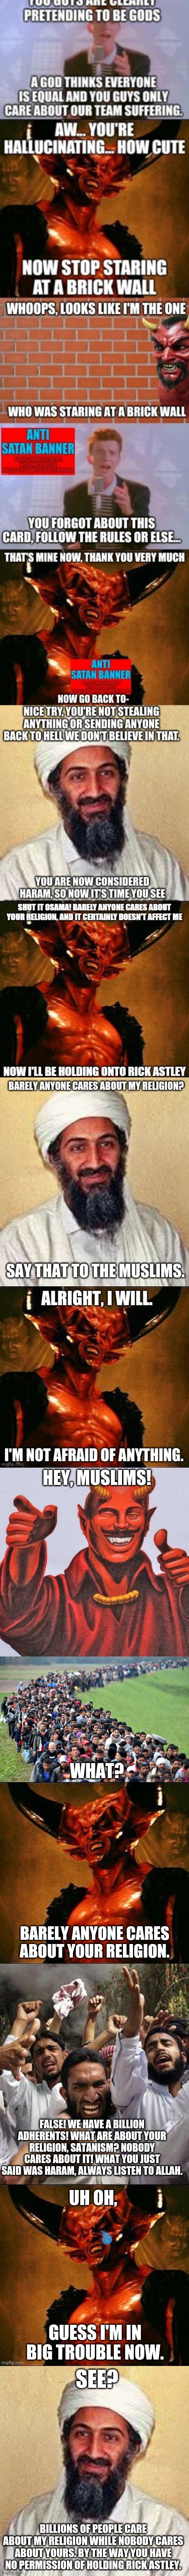 Islamophobic much? | SEE? BILLIONS OF PEOPLE CARE ABOUT MY RELIGION WHILE NOBODY CARES ABOUT YOURS. BY THE WAY YOU HAVE NO PERMISSION OF HOLDING RICK ASTLEY. | image tagged in allah akbar,satan,muslim-welfare-migrants,angry muslim | made w/ Imgflip meme maker